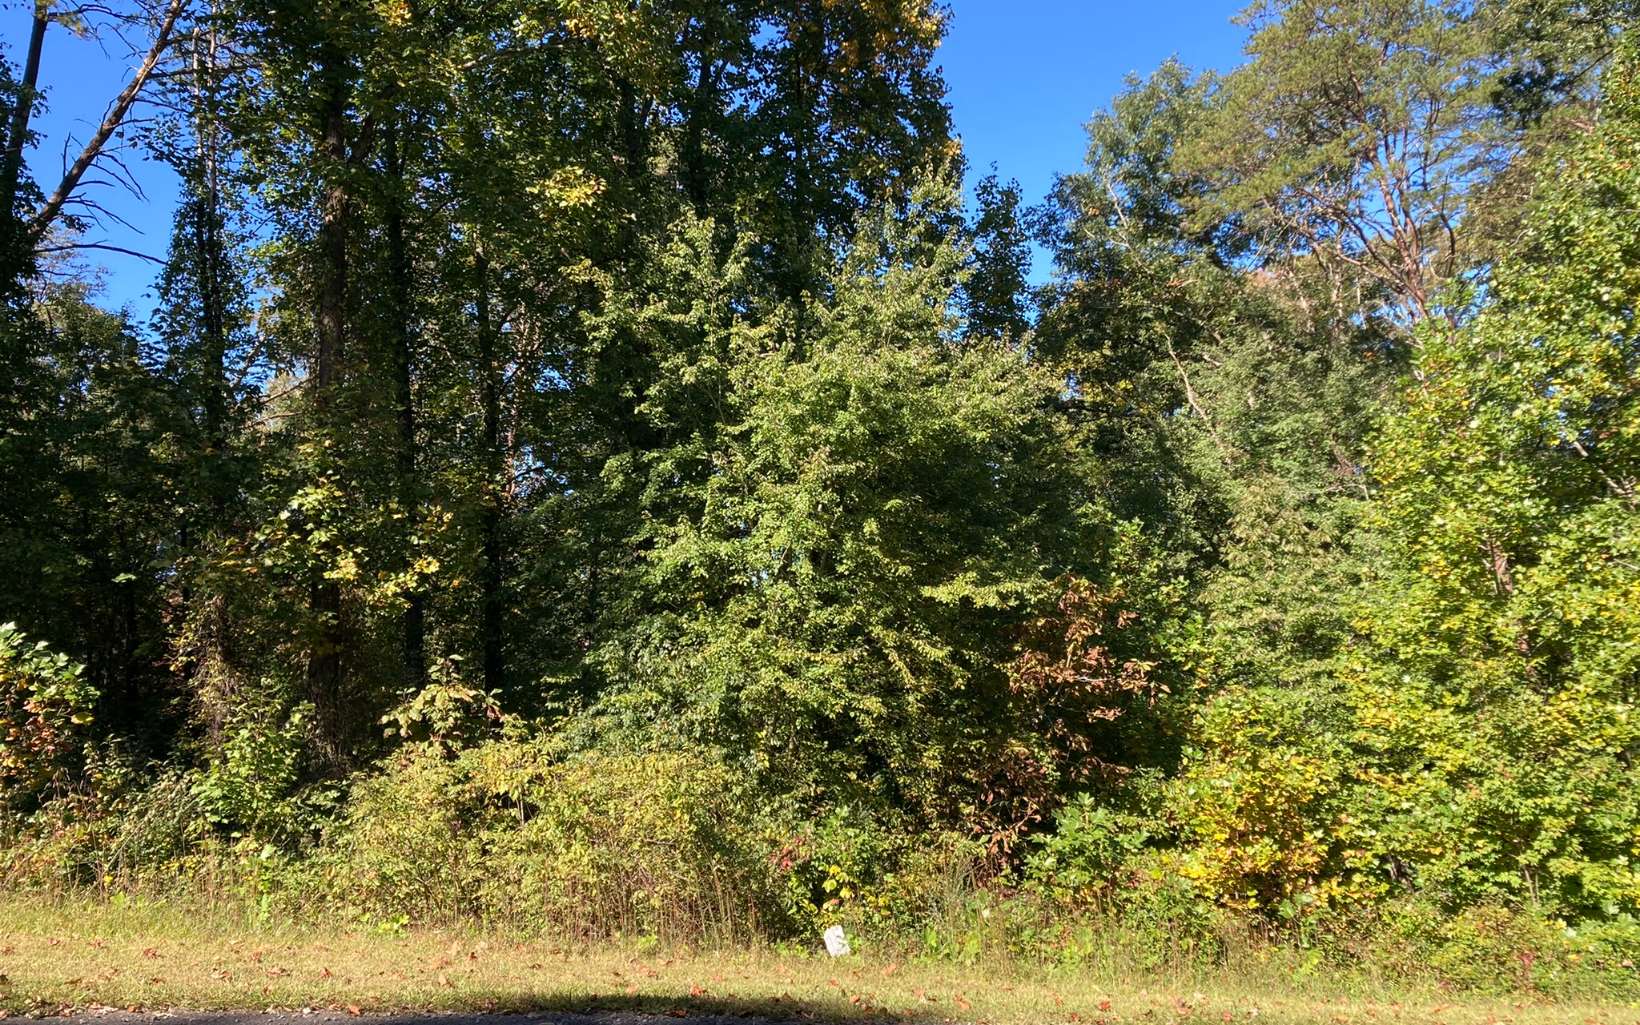 LOVELY Lot in private upscale community overlooking Kyle Branch stream. All underground utilities, including public water, and paved roads make for easy construction and great living. Lot is within minutes of both Blue Ridge and McCaysville…less than 2 minutes to Fannin Regional Hospital. Sensible covenants and restrictions make this a great community to build in